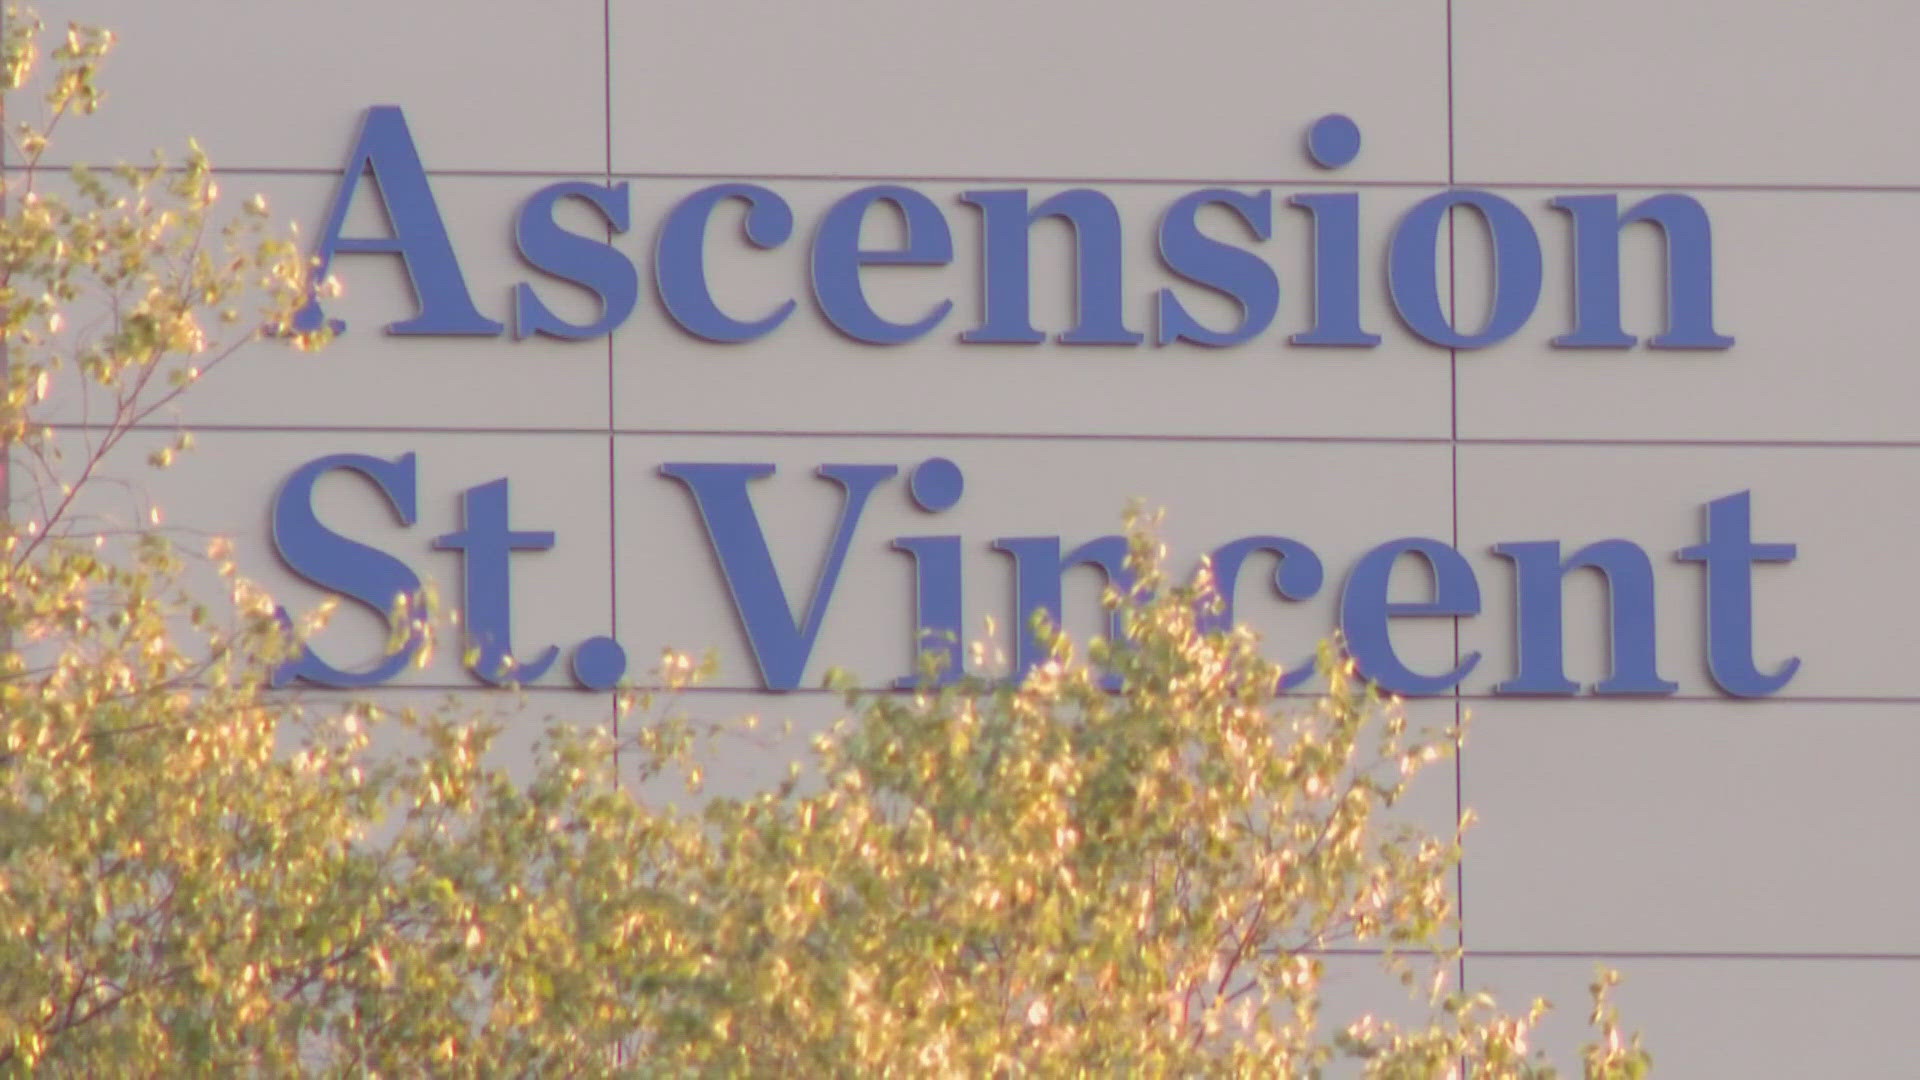 13News reporter Karen Campbell talks with cybersecurity expert John Boomershine with BlackInk IT about the recent cyber attacks at Ascension St. Vincent hospitals.